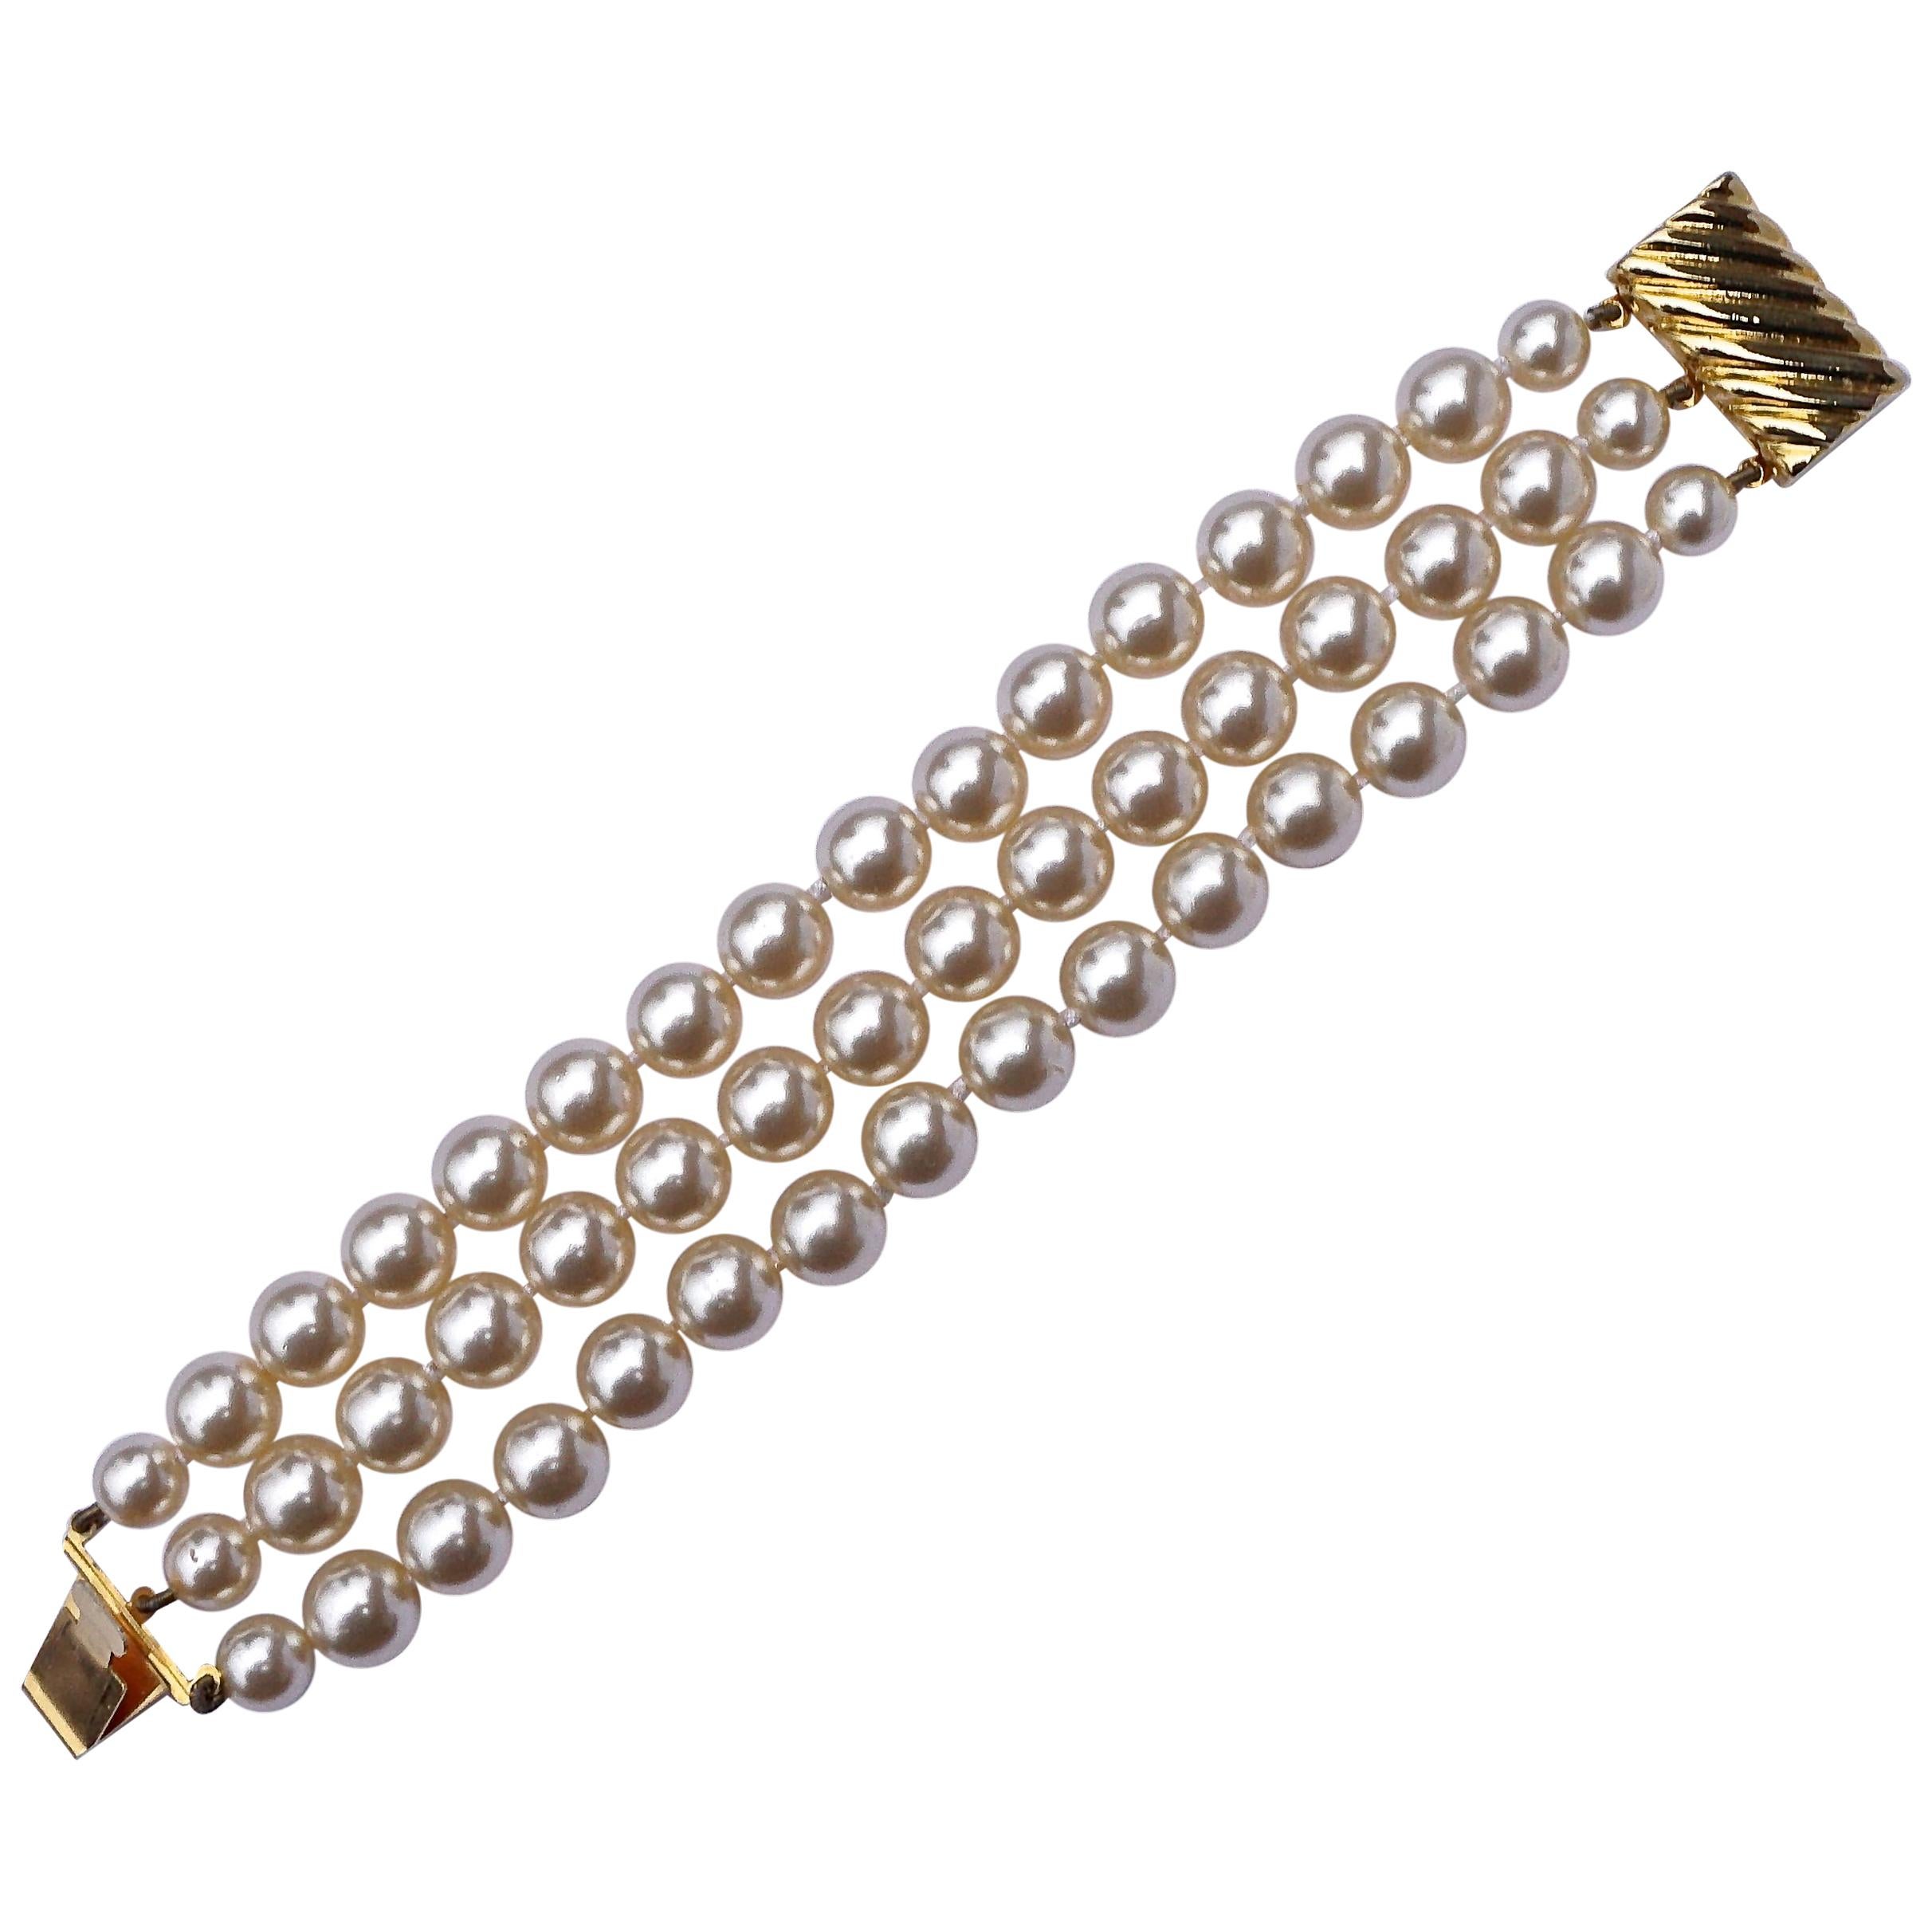 Triple Strand Knotted Faux Pearl Bracelet with a Fancy Gold Tone Clasp